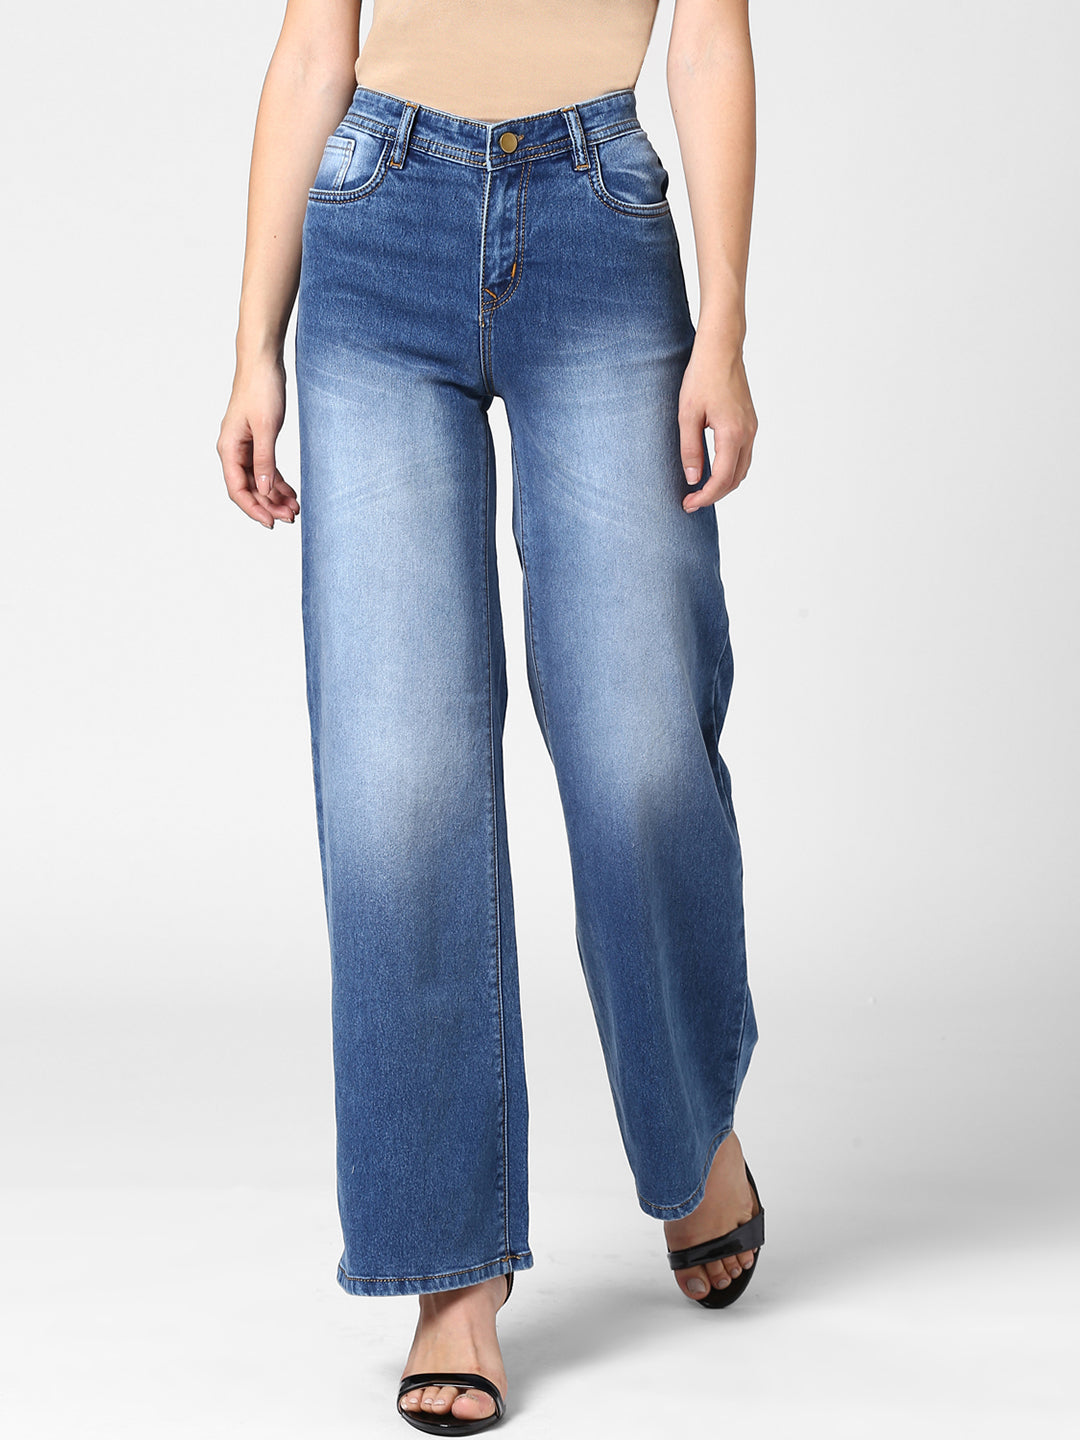 Women's Blue Flared Denim Jeans with washed effect